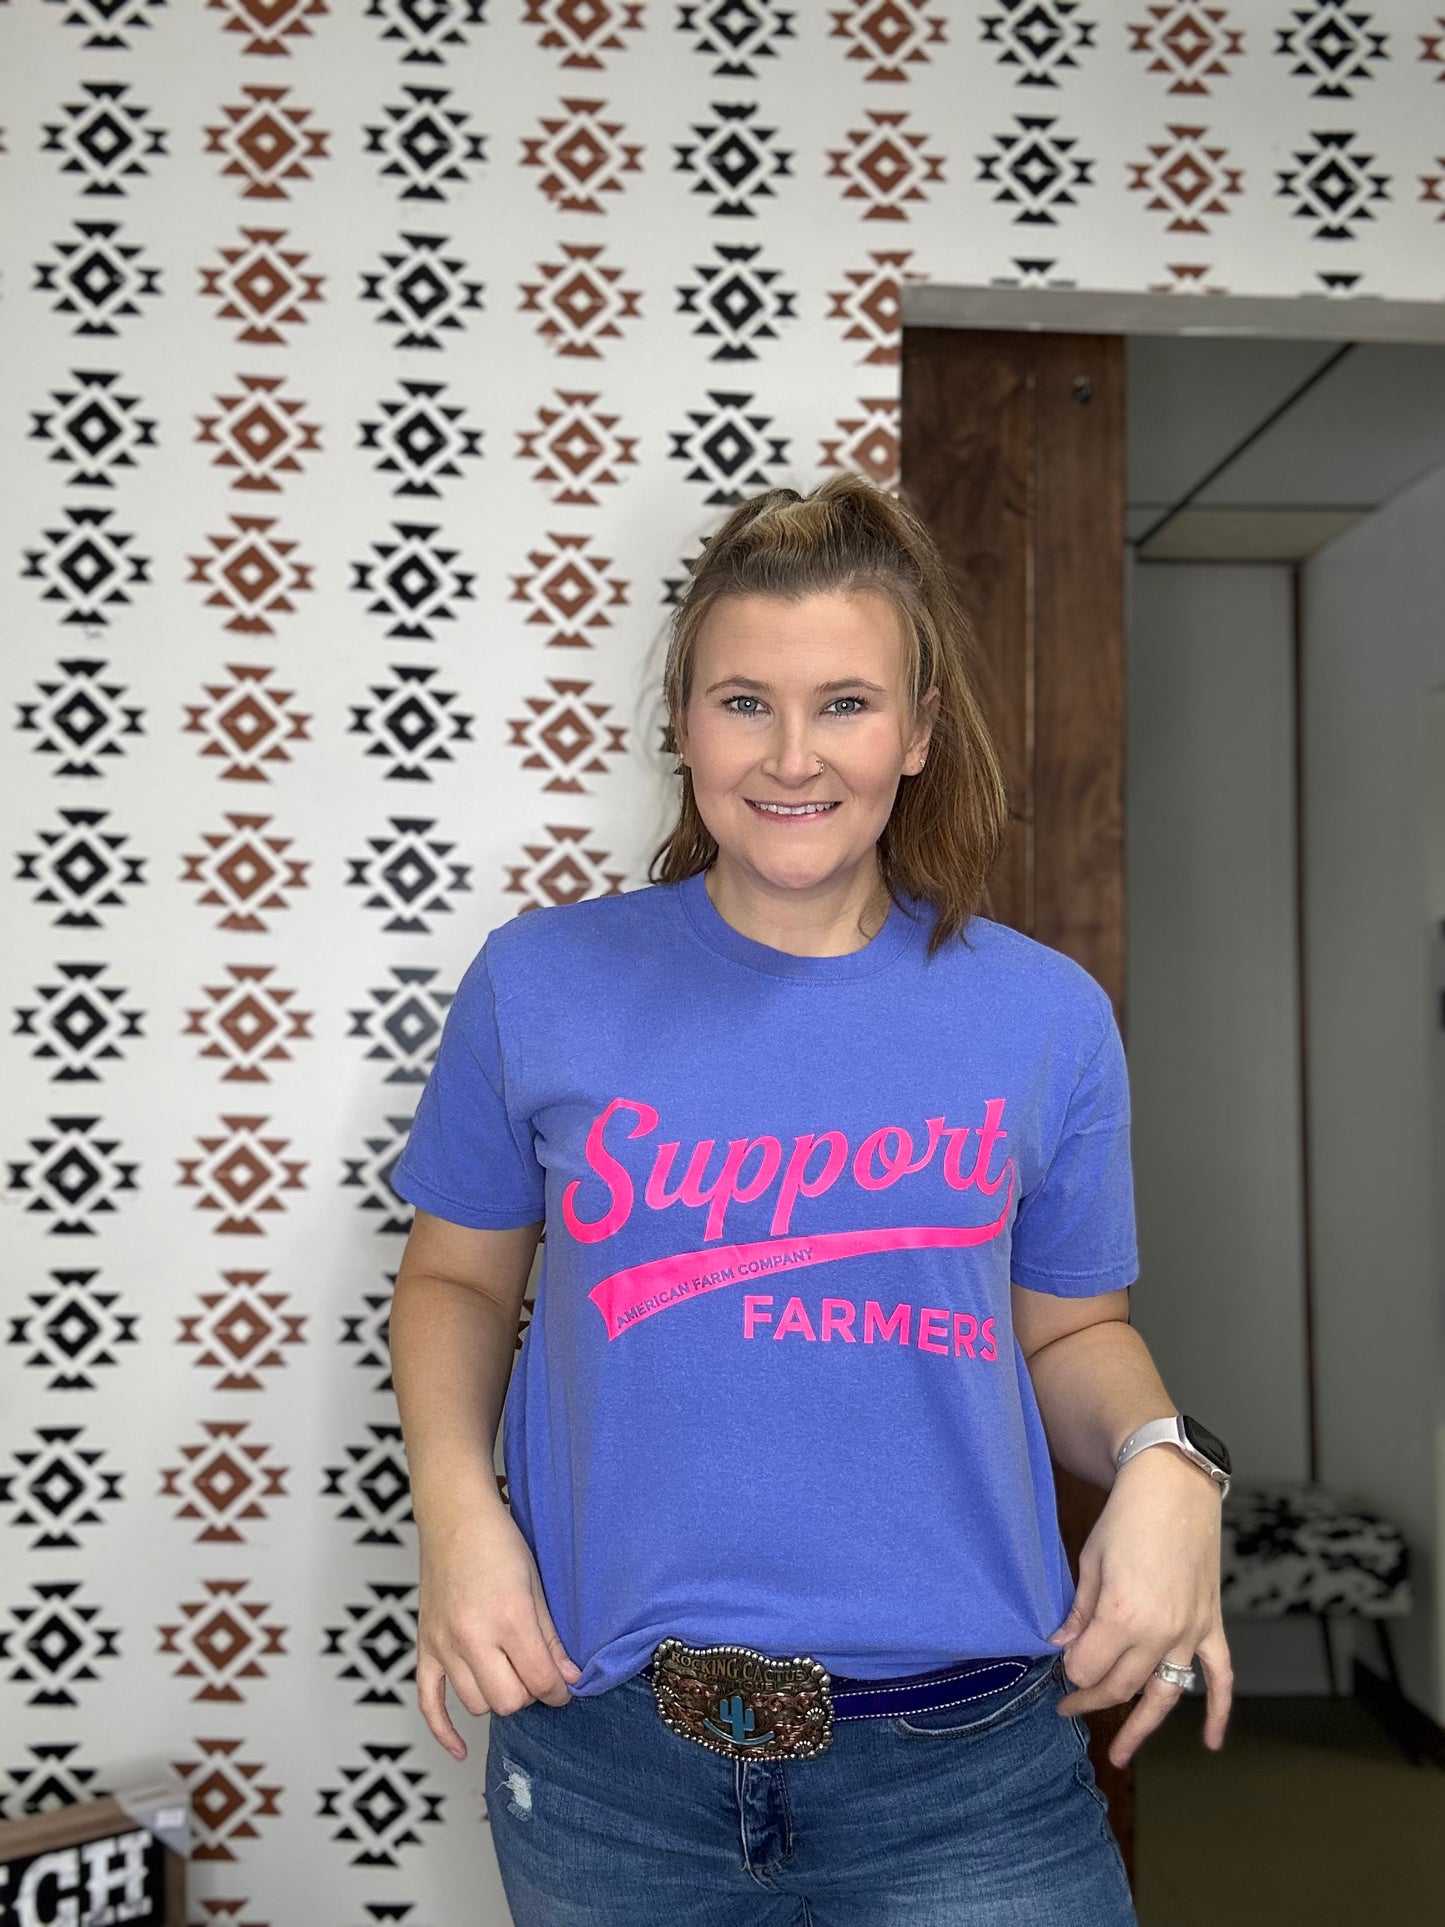 The Neon Support Farmers Tee